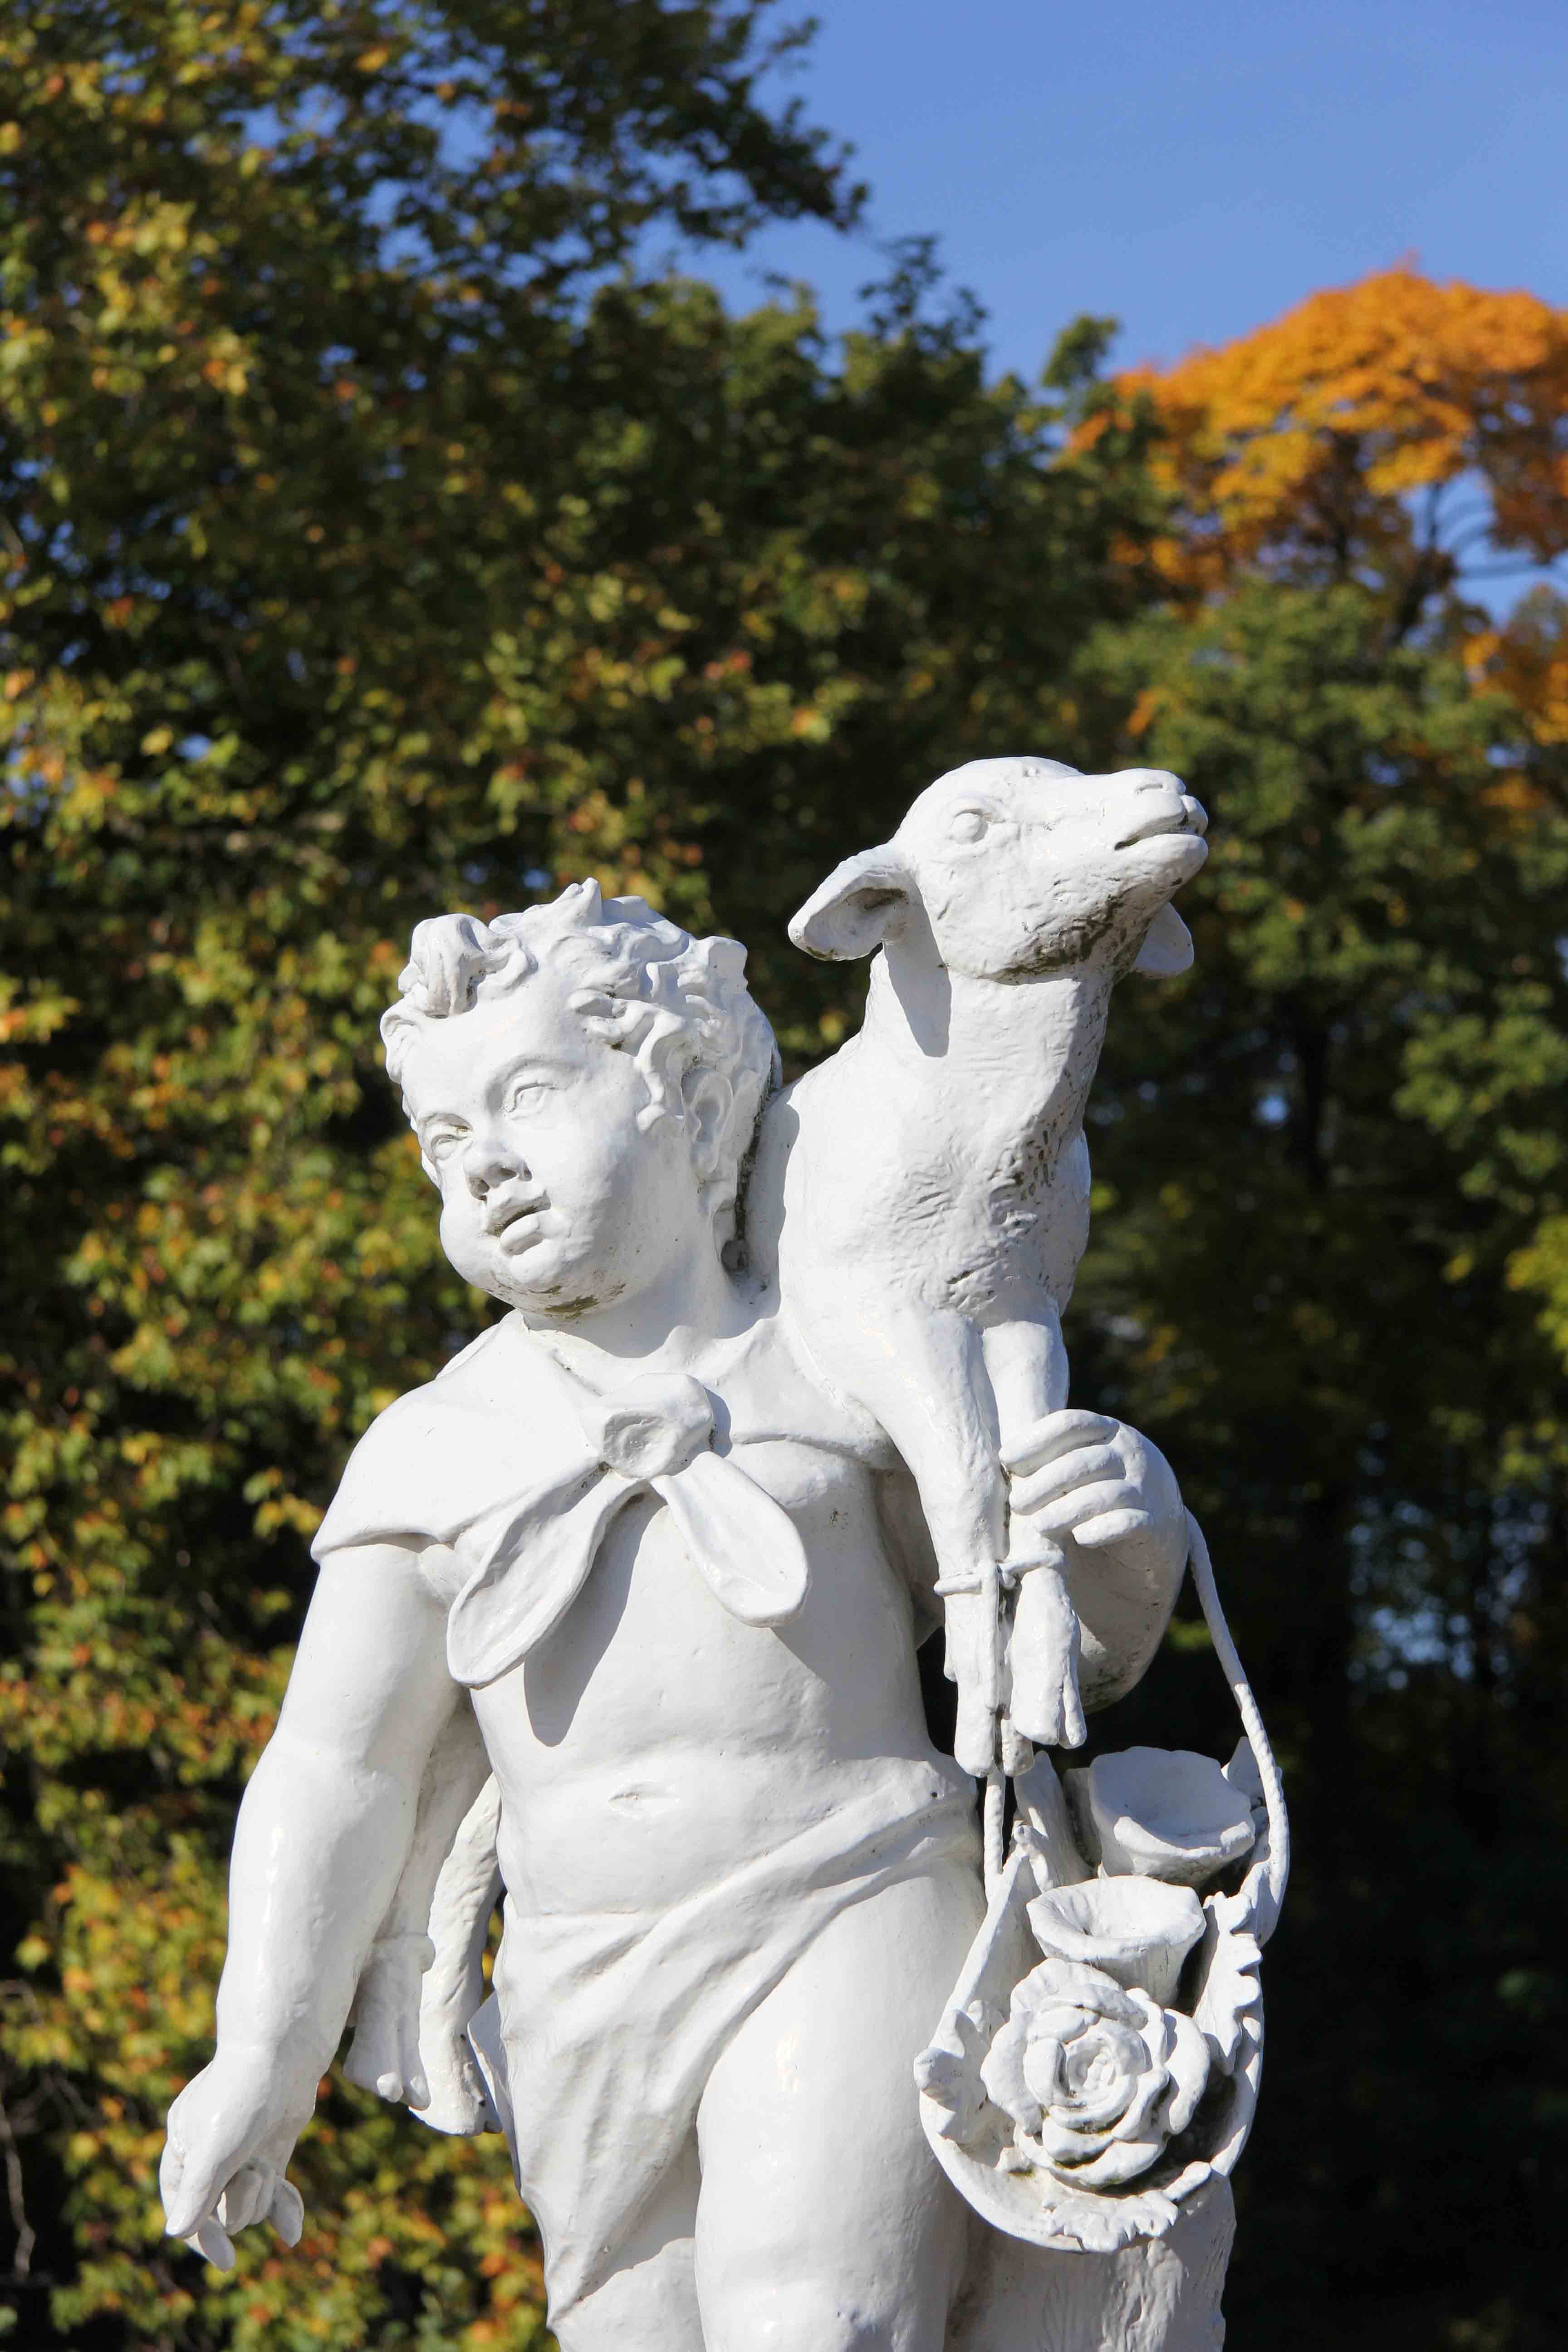 A statue of a child carrying a lamb in The Palace Gardens of Schloss Charlottenburg in Berlin